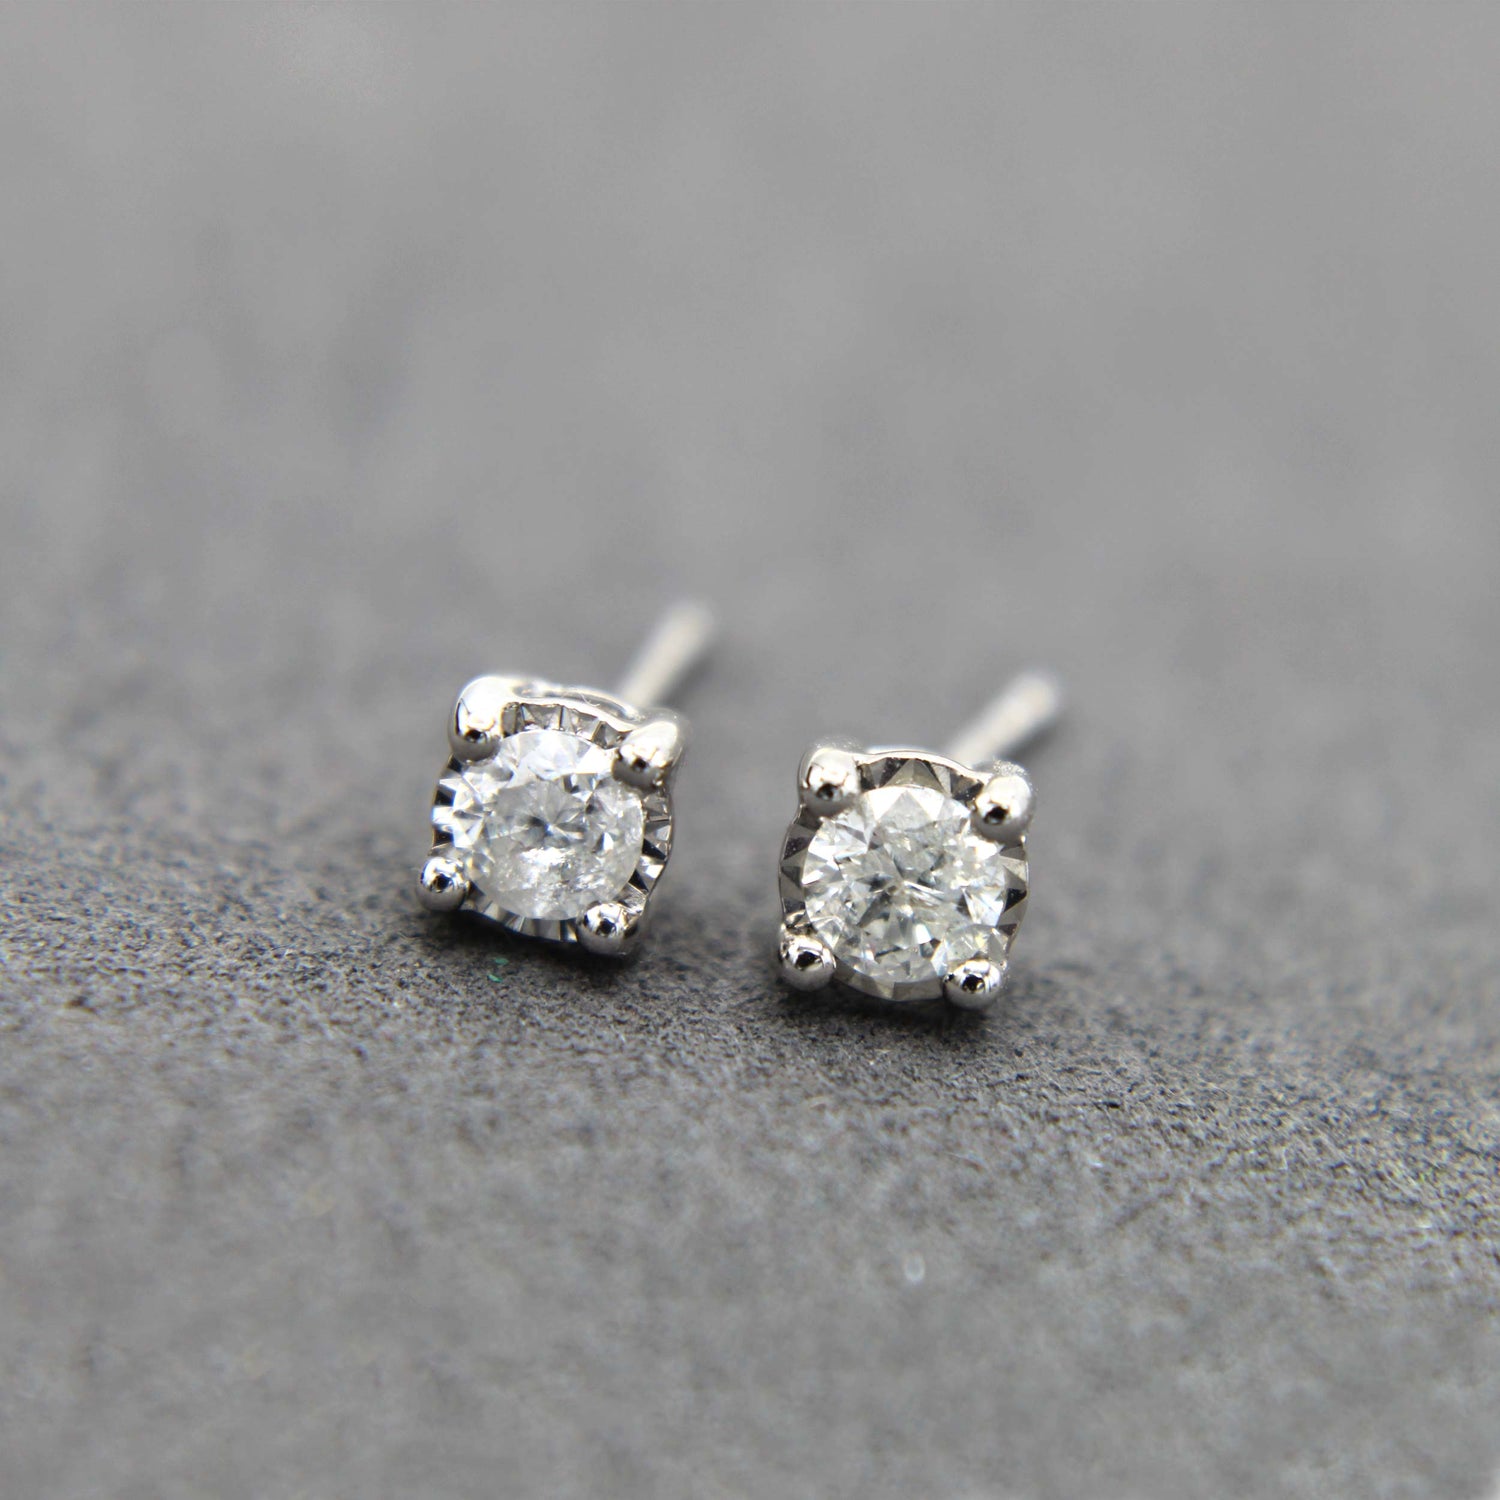 3/4 CTW (I2 Clarity) Natural Diamond Studs Earrings in14K White Gold/Yellow Gold/Rose Gold